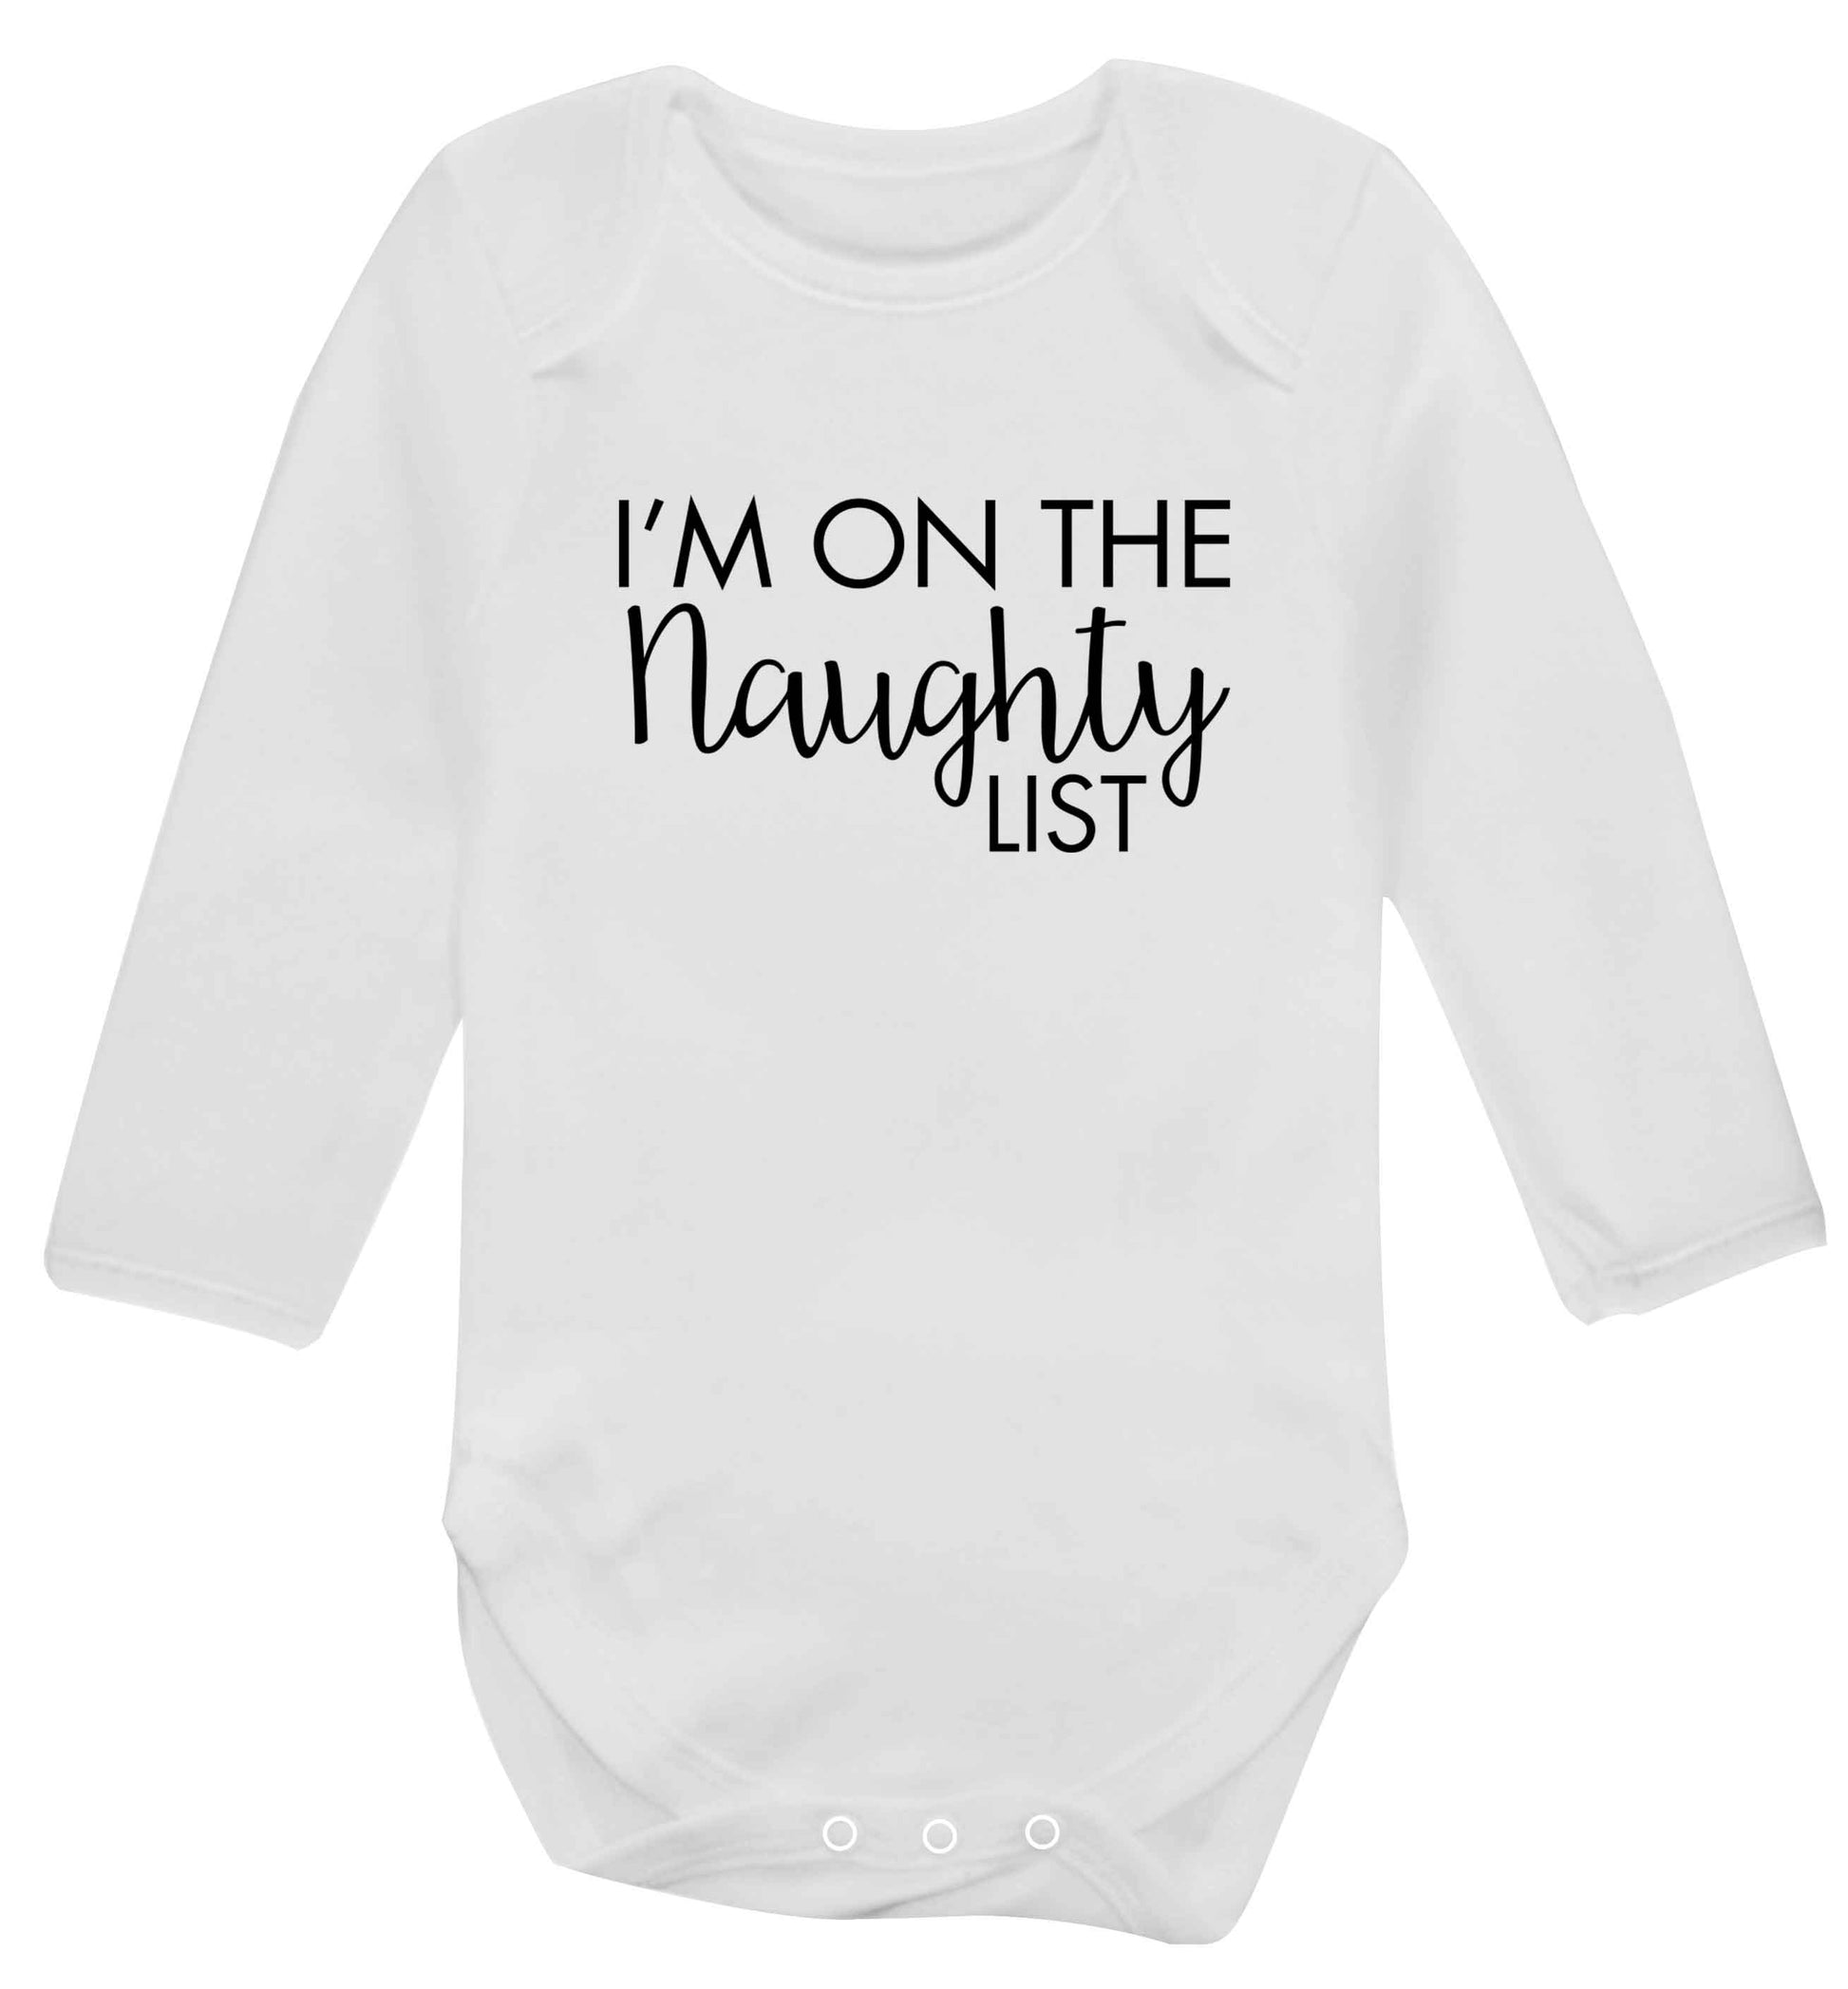 I'm on the naughty list baby vest long sleeved white 6-12 months